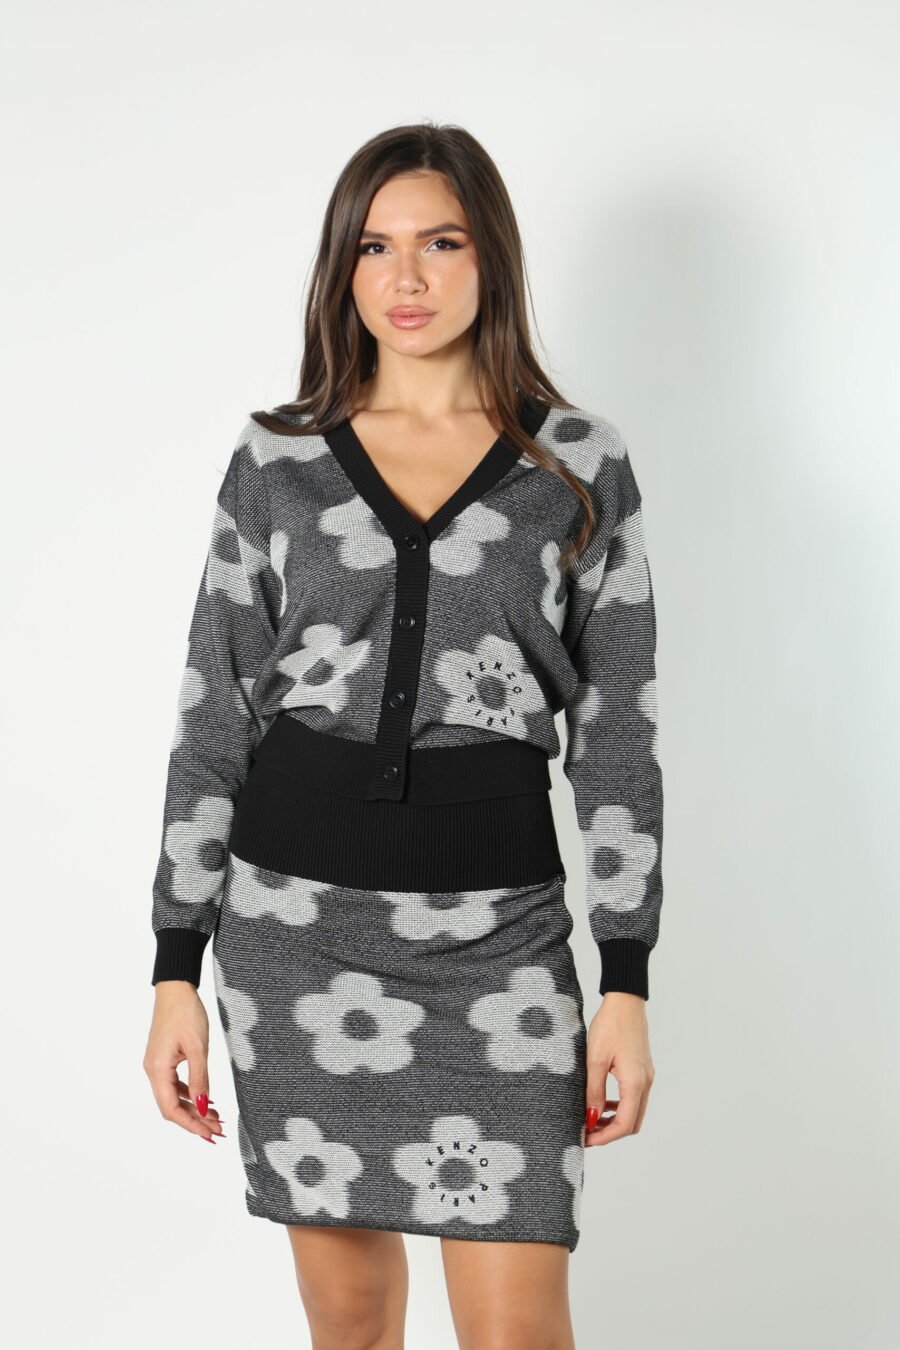 Jersey gris con botones "all over boke flower logo " - 8052865435499 447 scaled